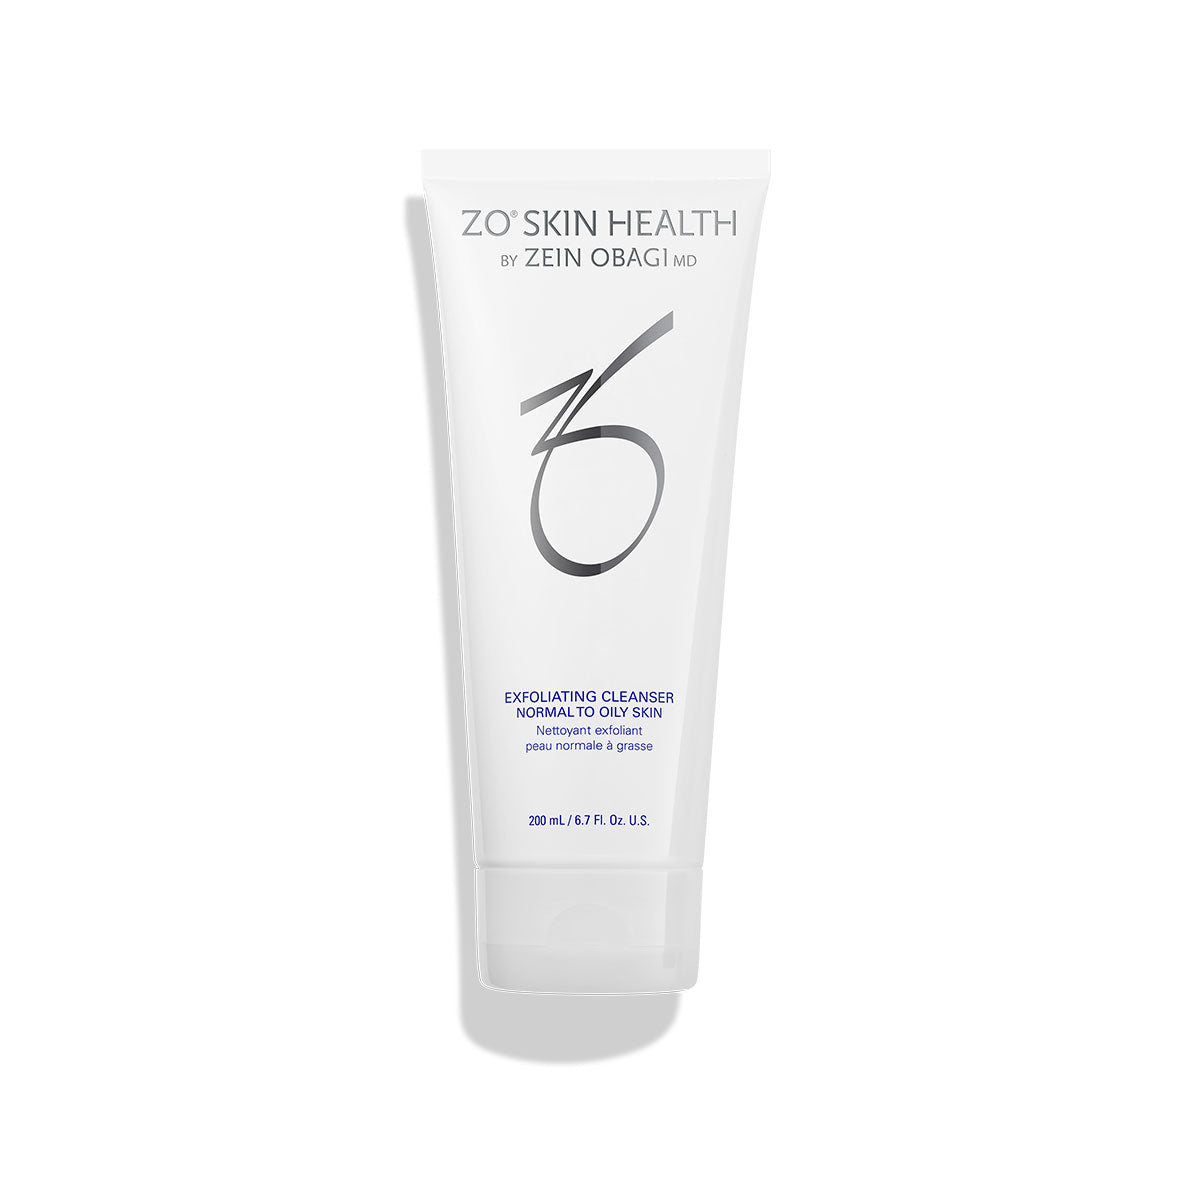 zo skin health exfoliating cleanser for normal or oily skin face wash